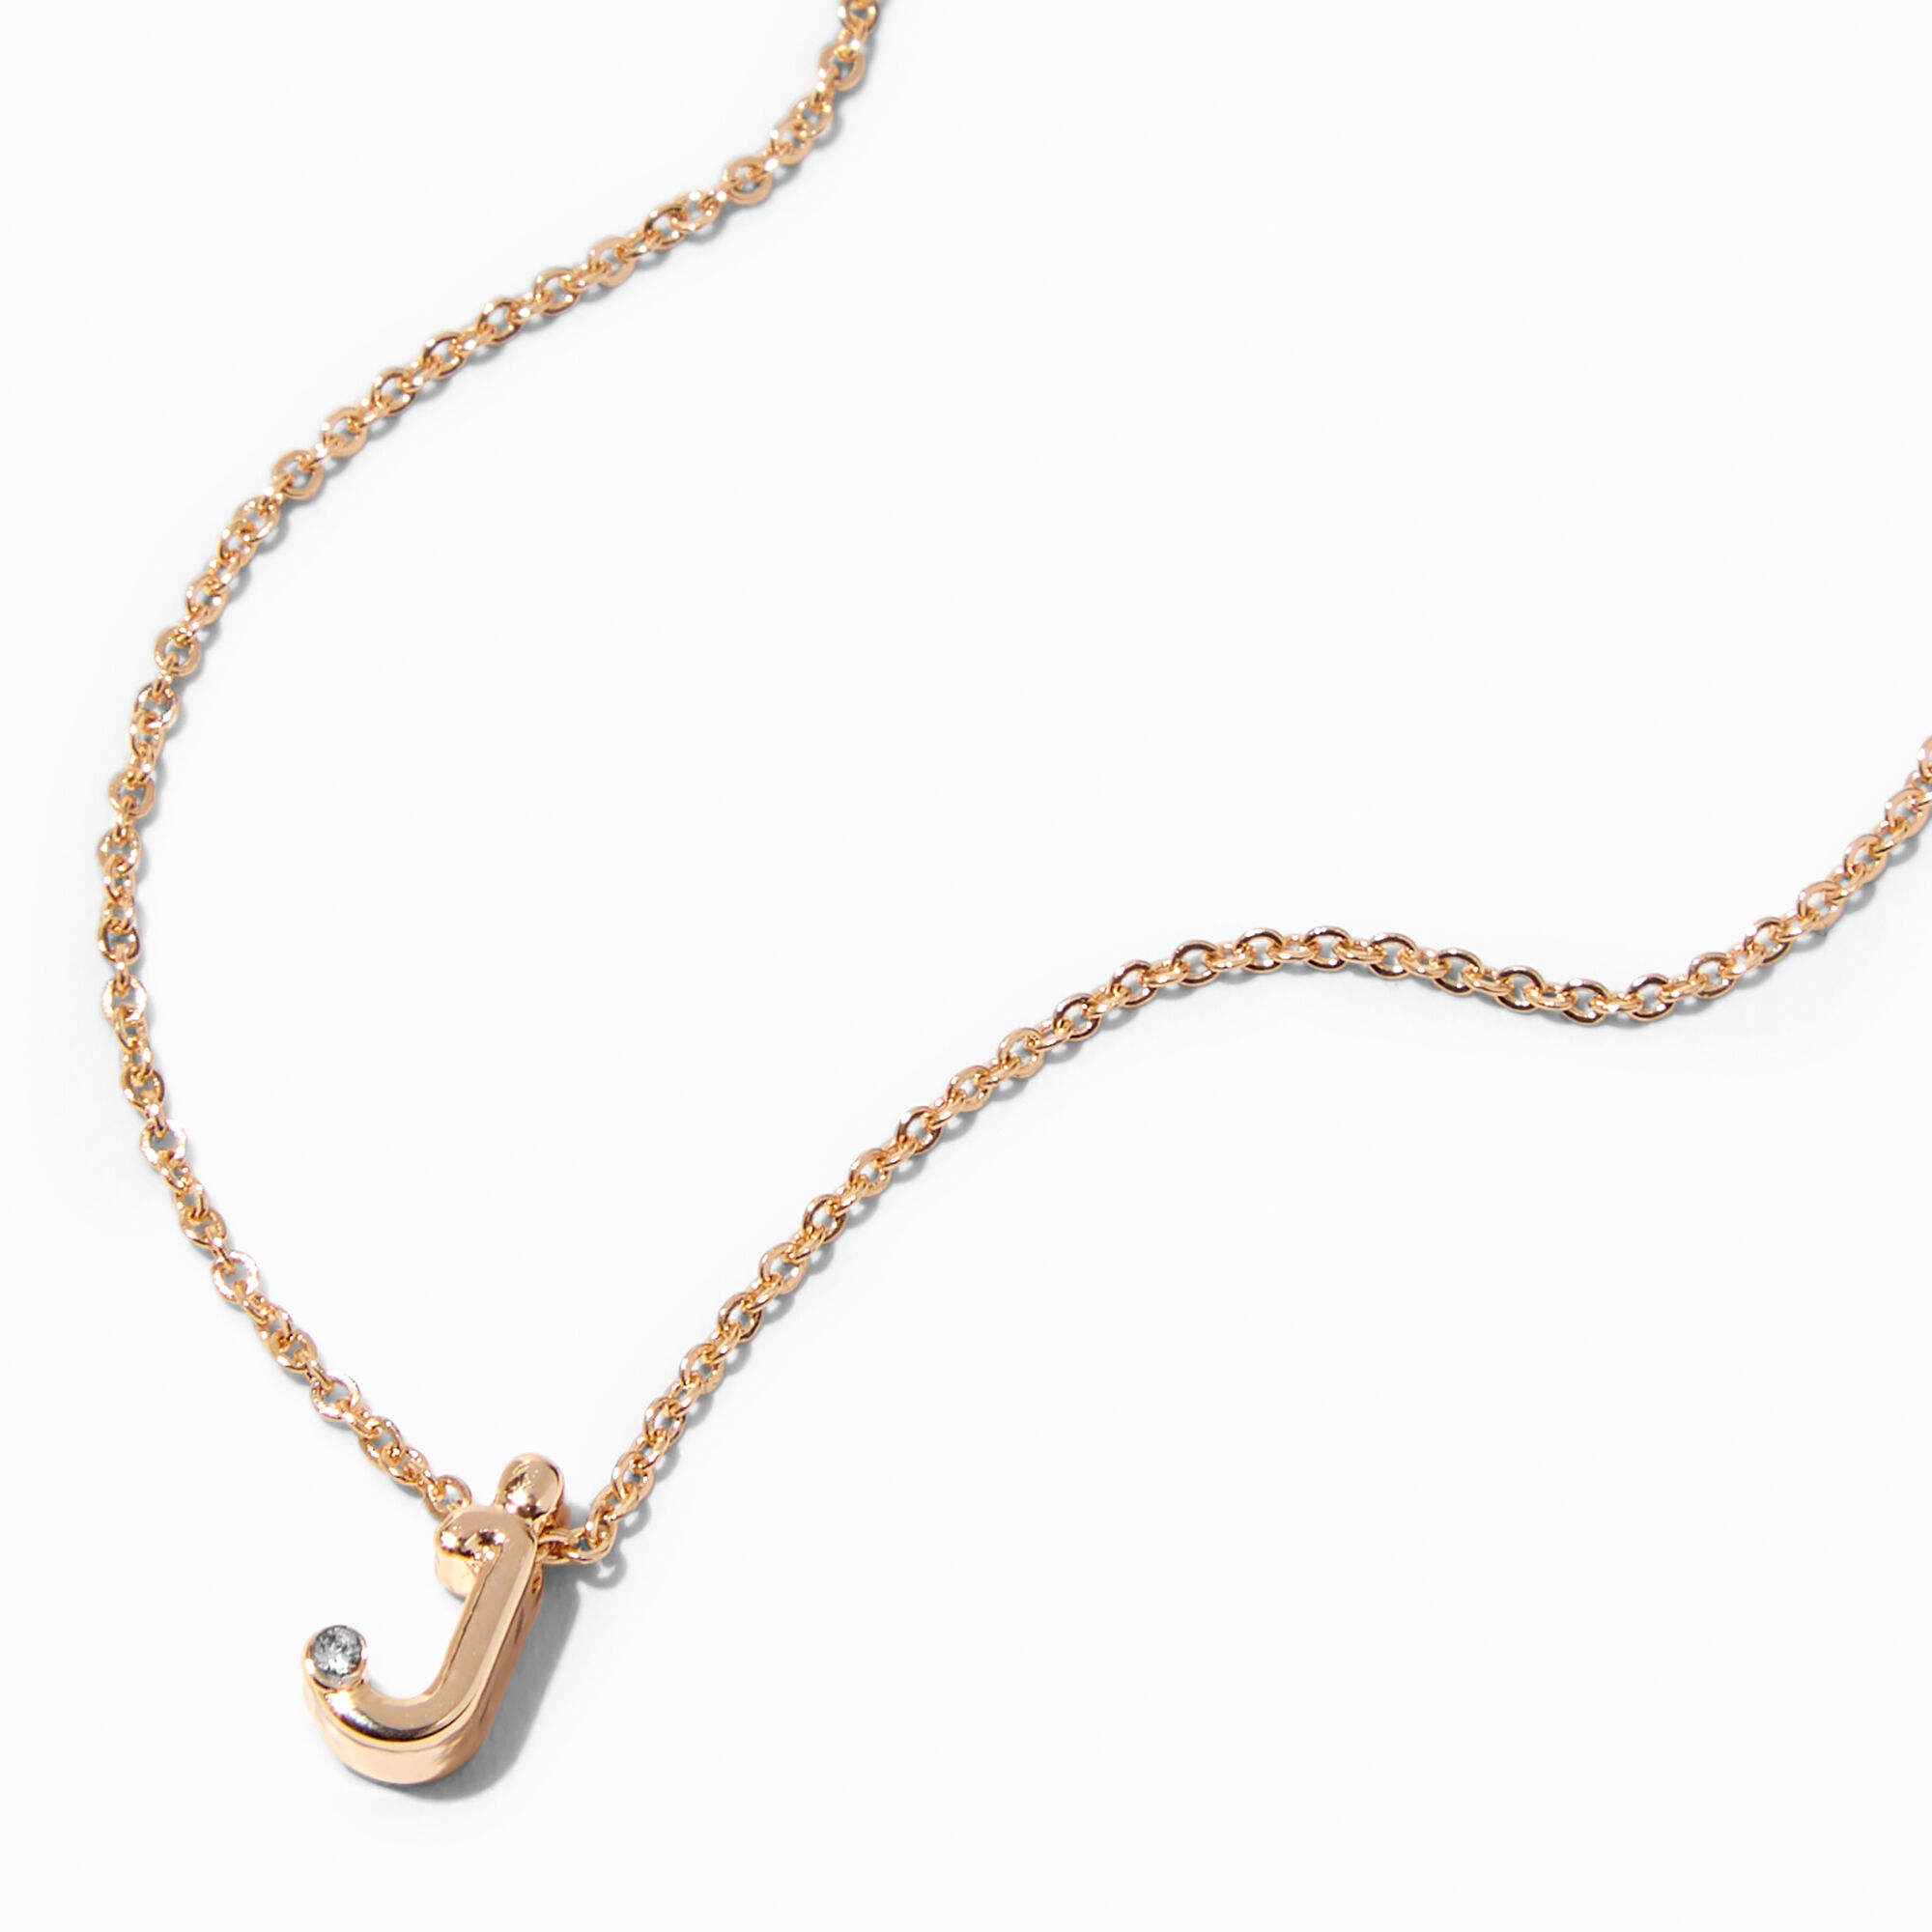 Lowercase Monogram on Curb Chain Necklace - FAB Accessories Inc.